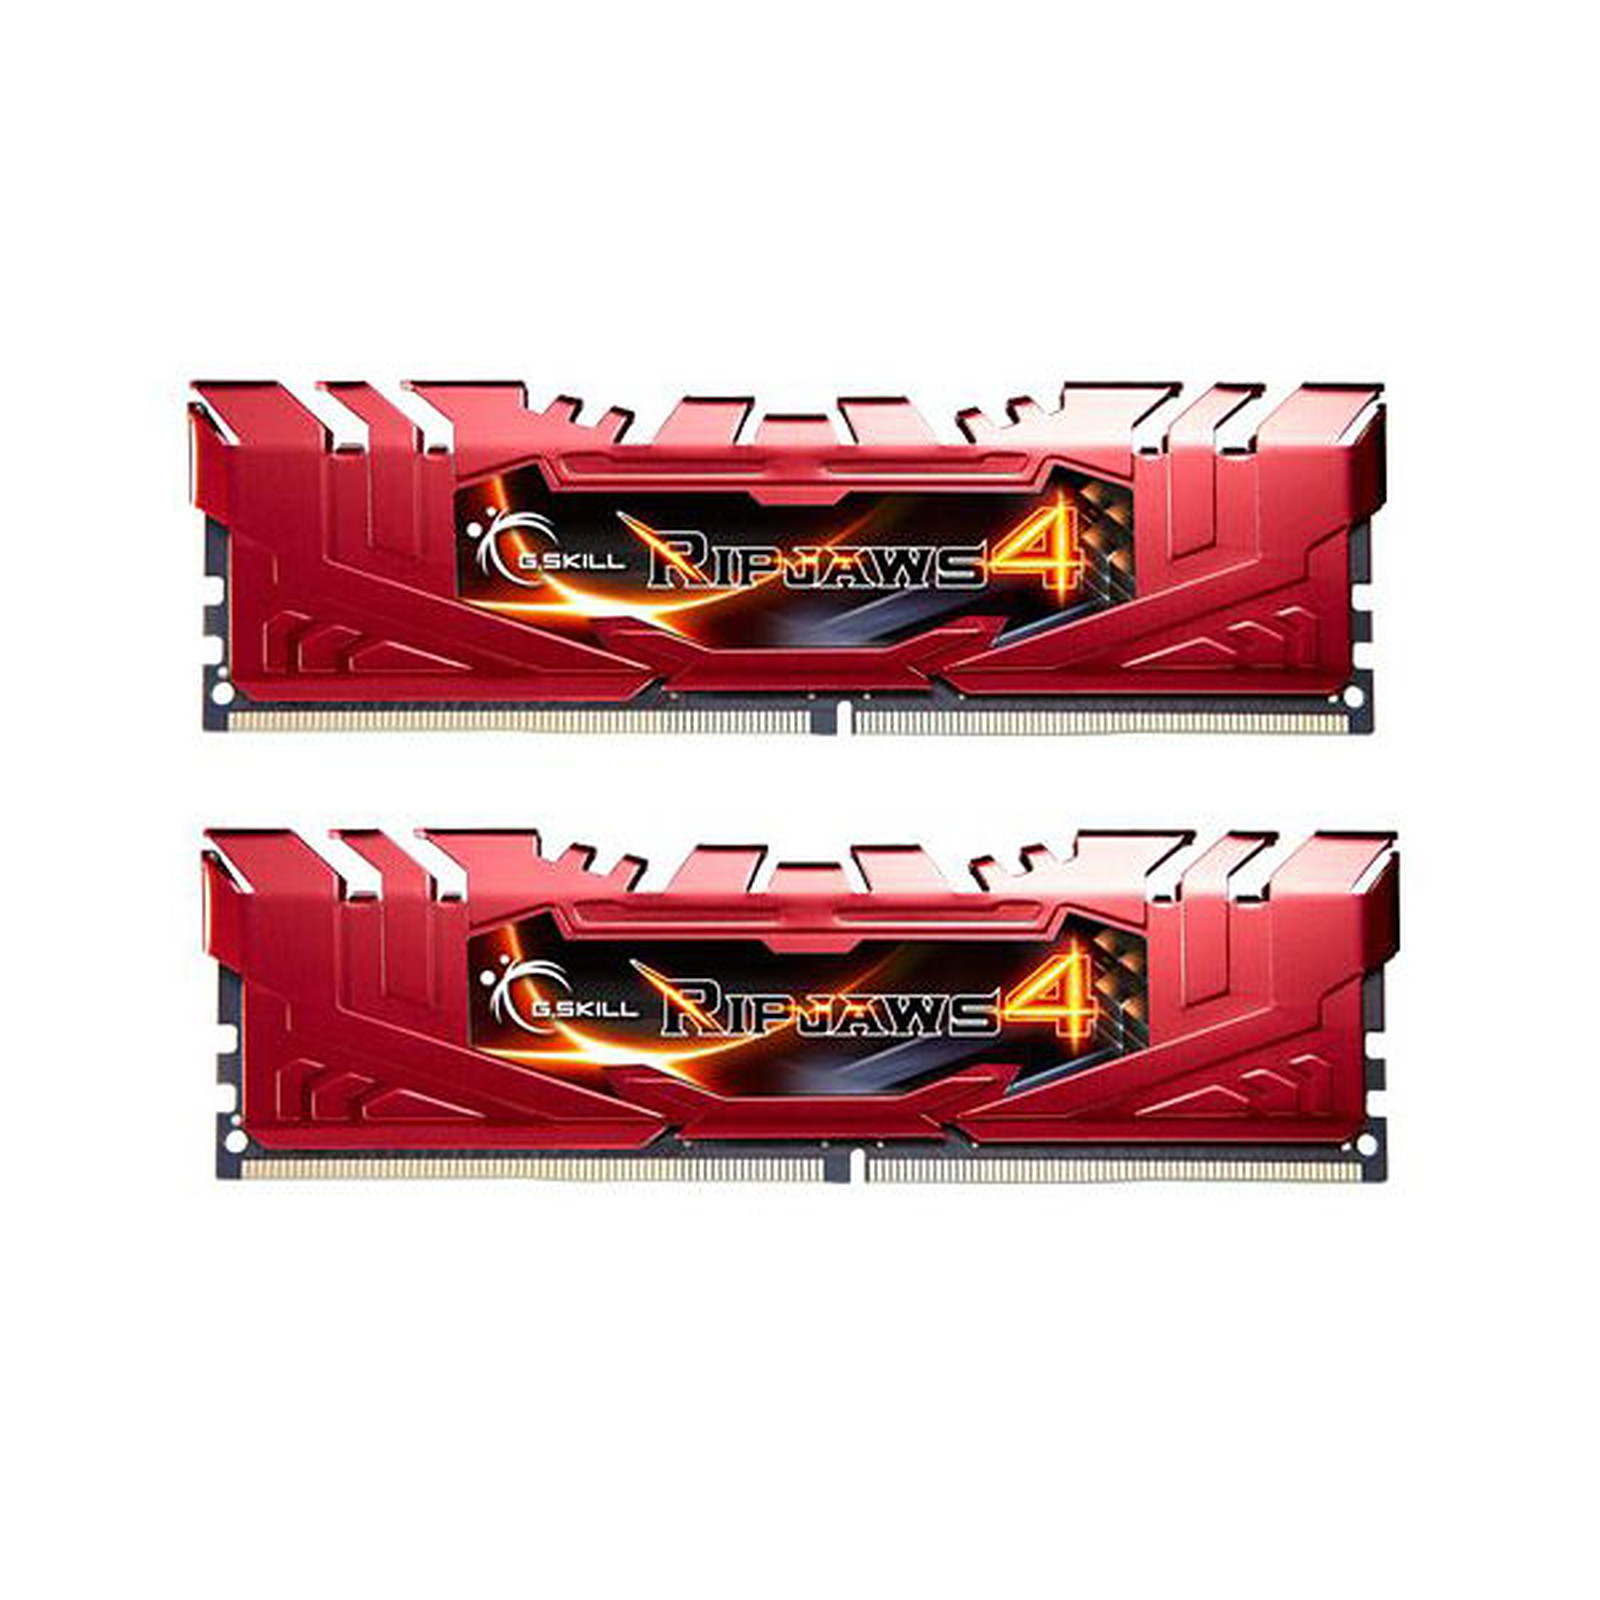 G.Skill RipJaws 4 Series Rouge 16 Go (2x 8 Go) DDR4 2133 MHz CL15 - Memoire PC G.Skill